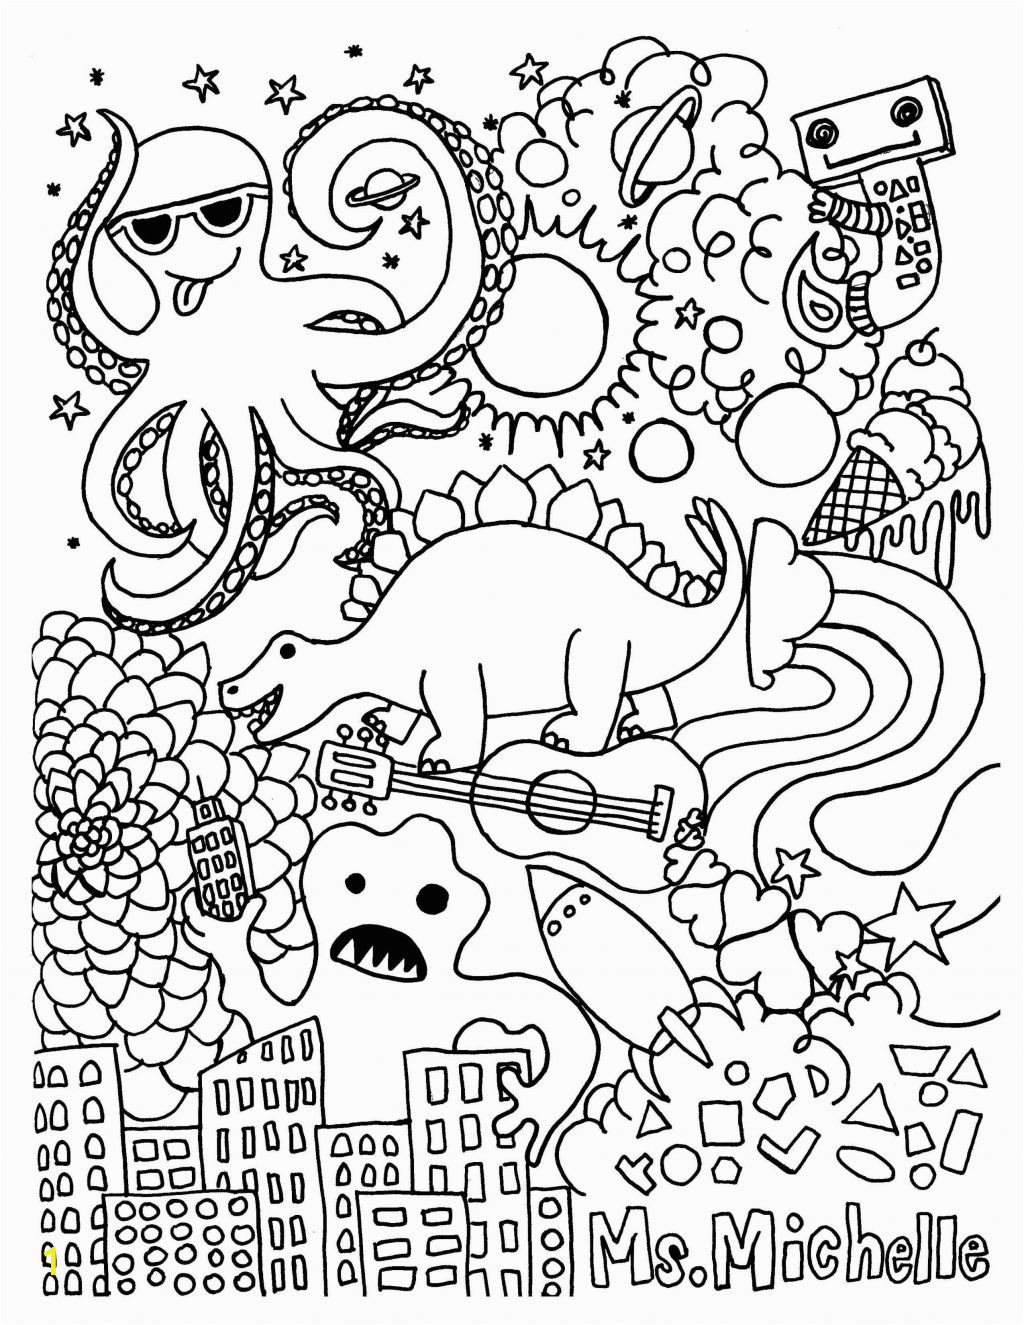 Full Size Printable Halloween Coloring Pages Second Grade Coloring Sheets Spring Pages for 2nd E2 80 93